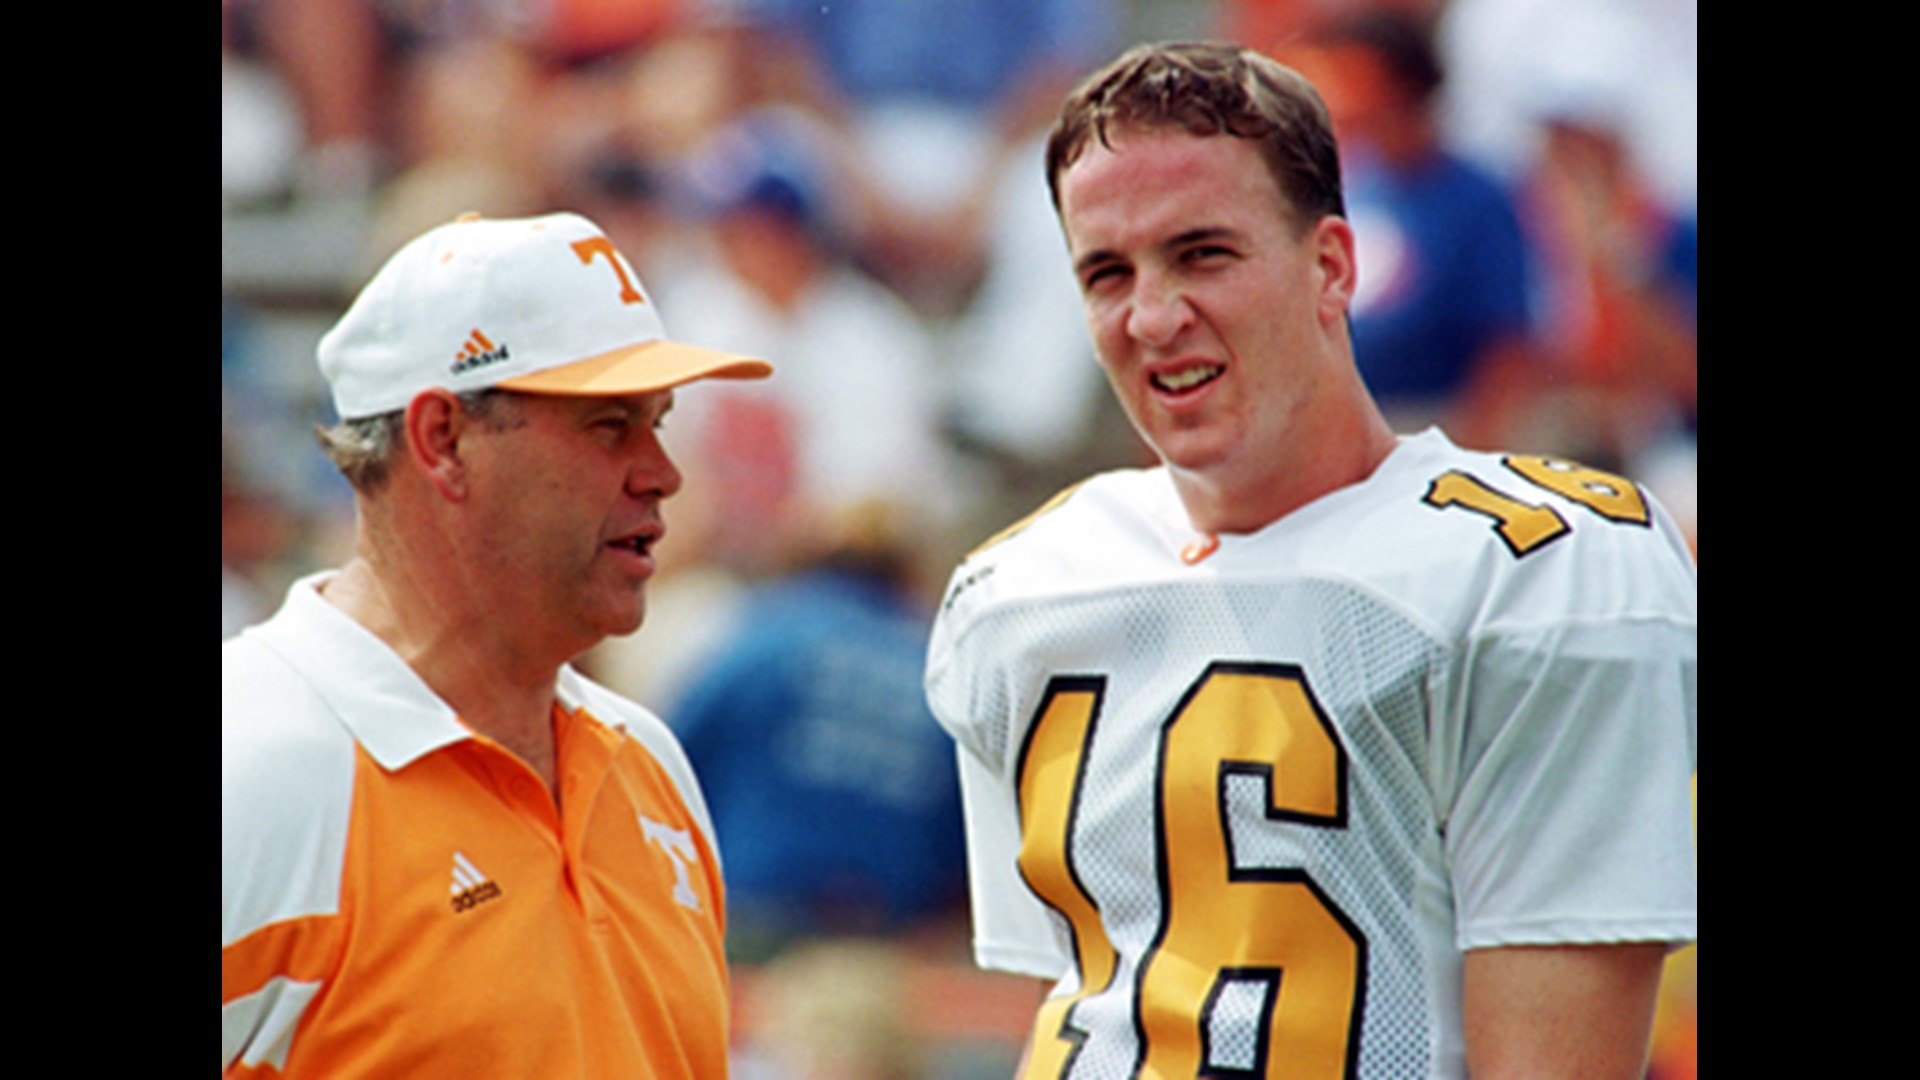 Peyton Manning named into the College Football Hall of Fame